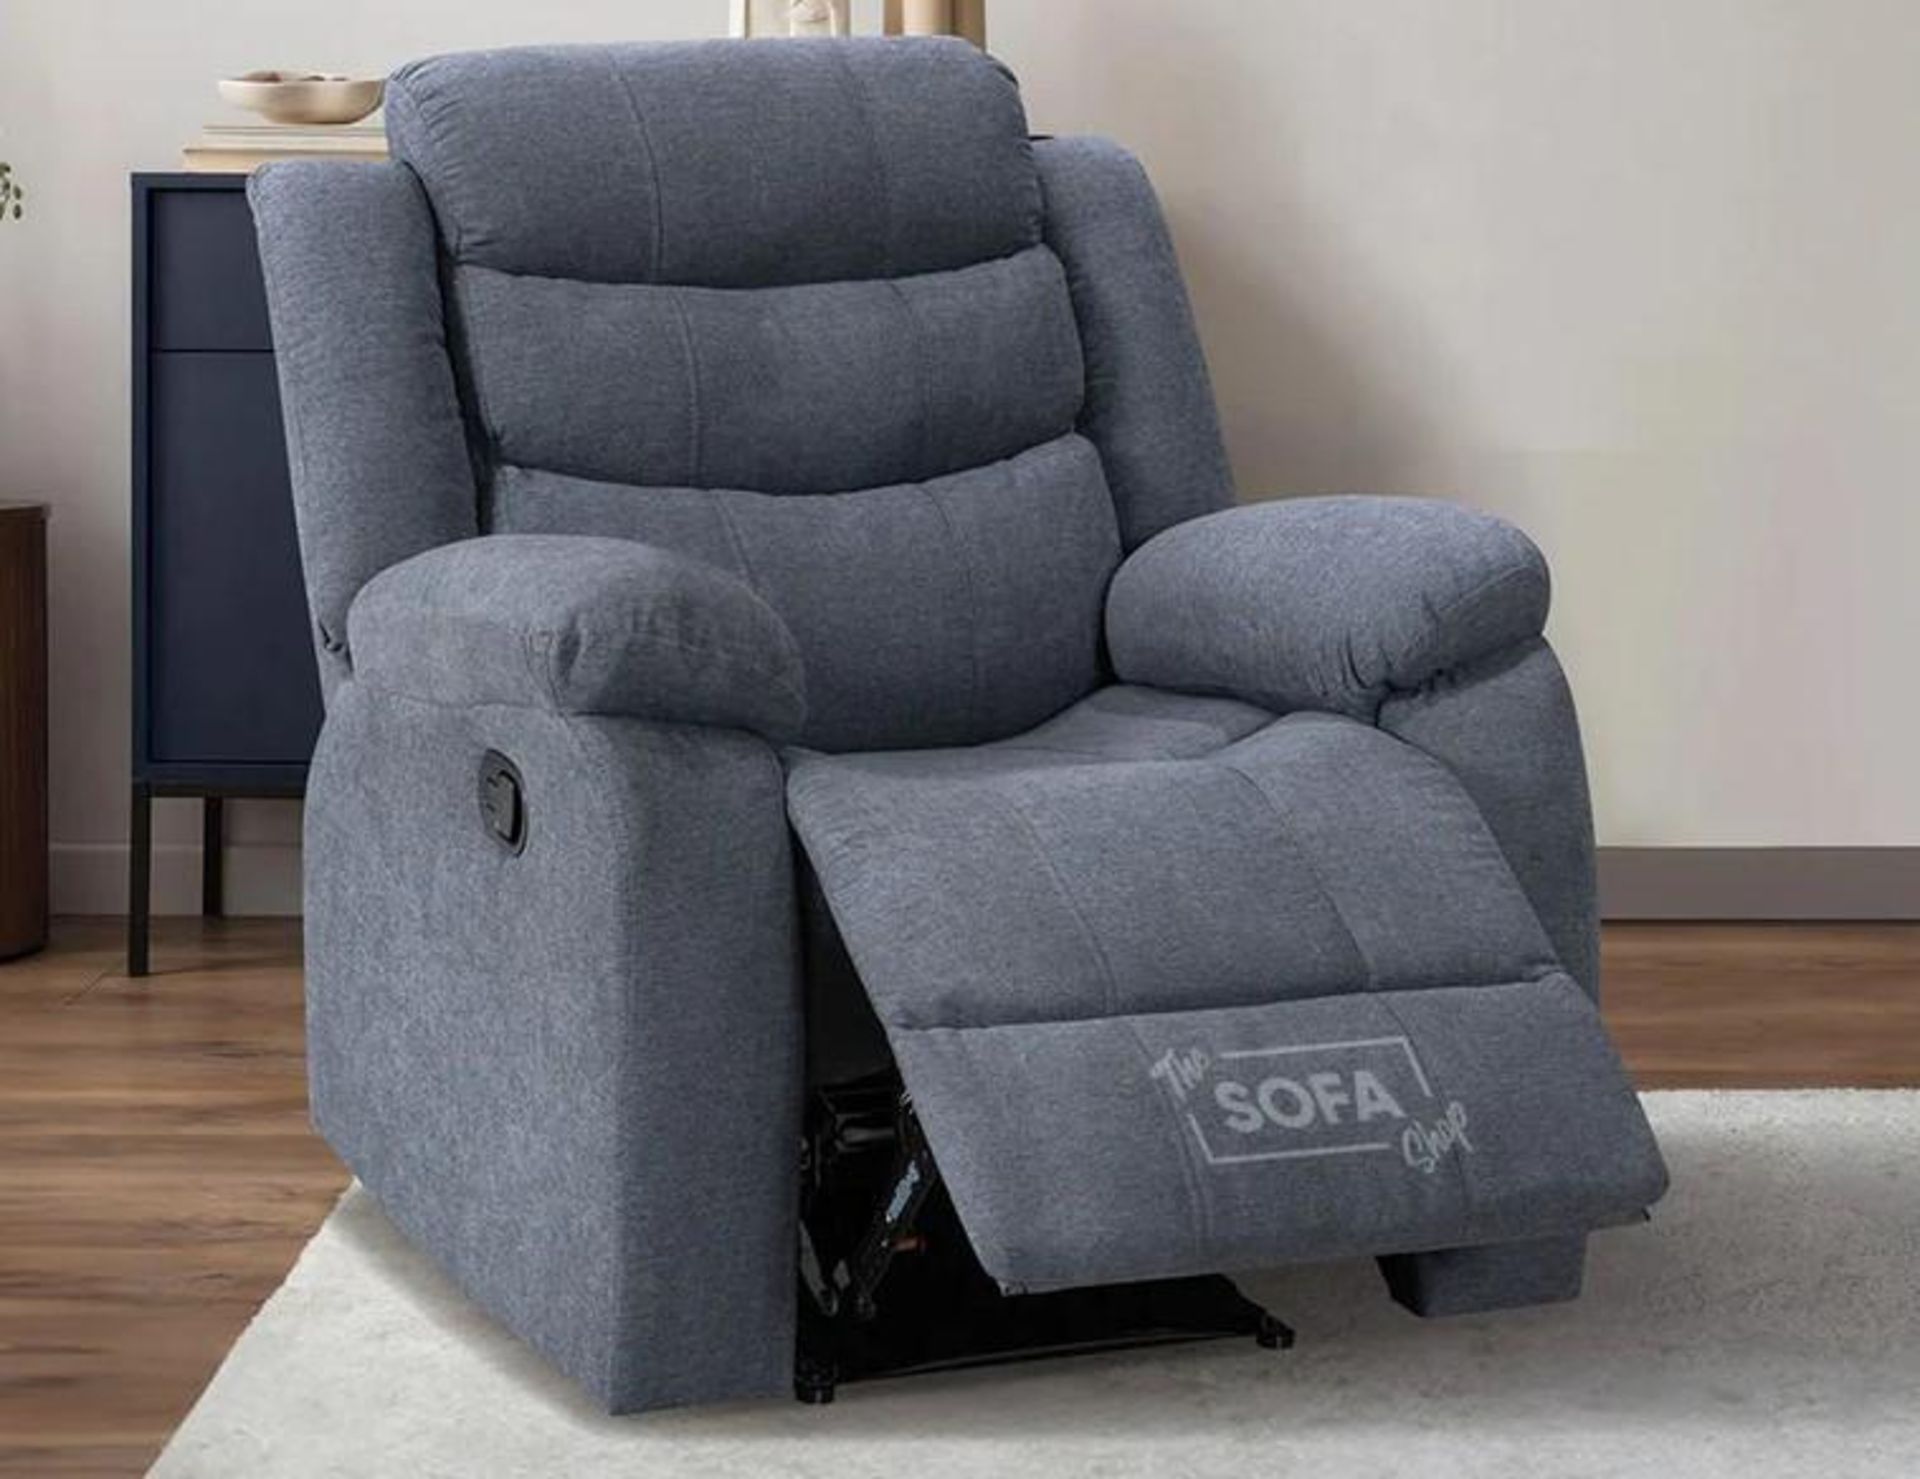 BRAND NEW & BOXED Malaga single seater manual reclining armchair in elephant Grey.